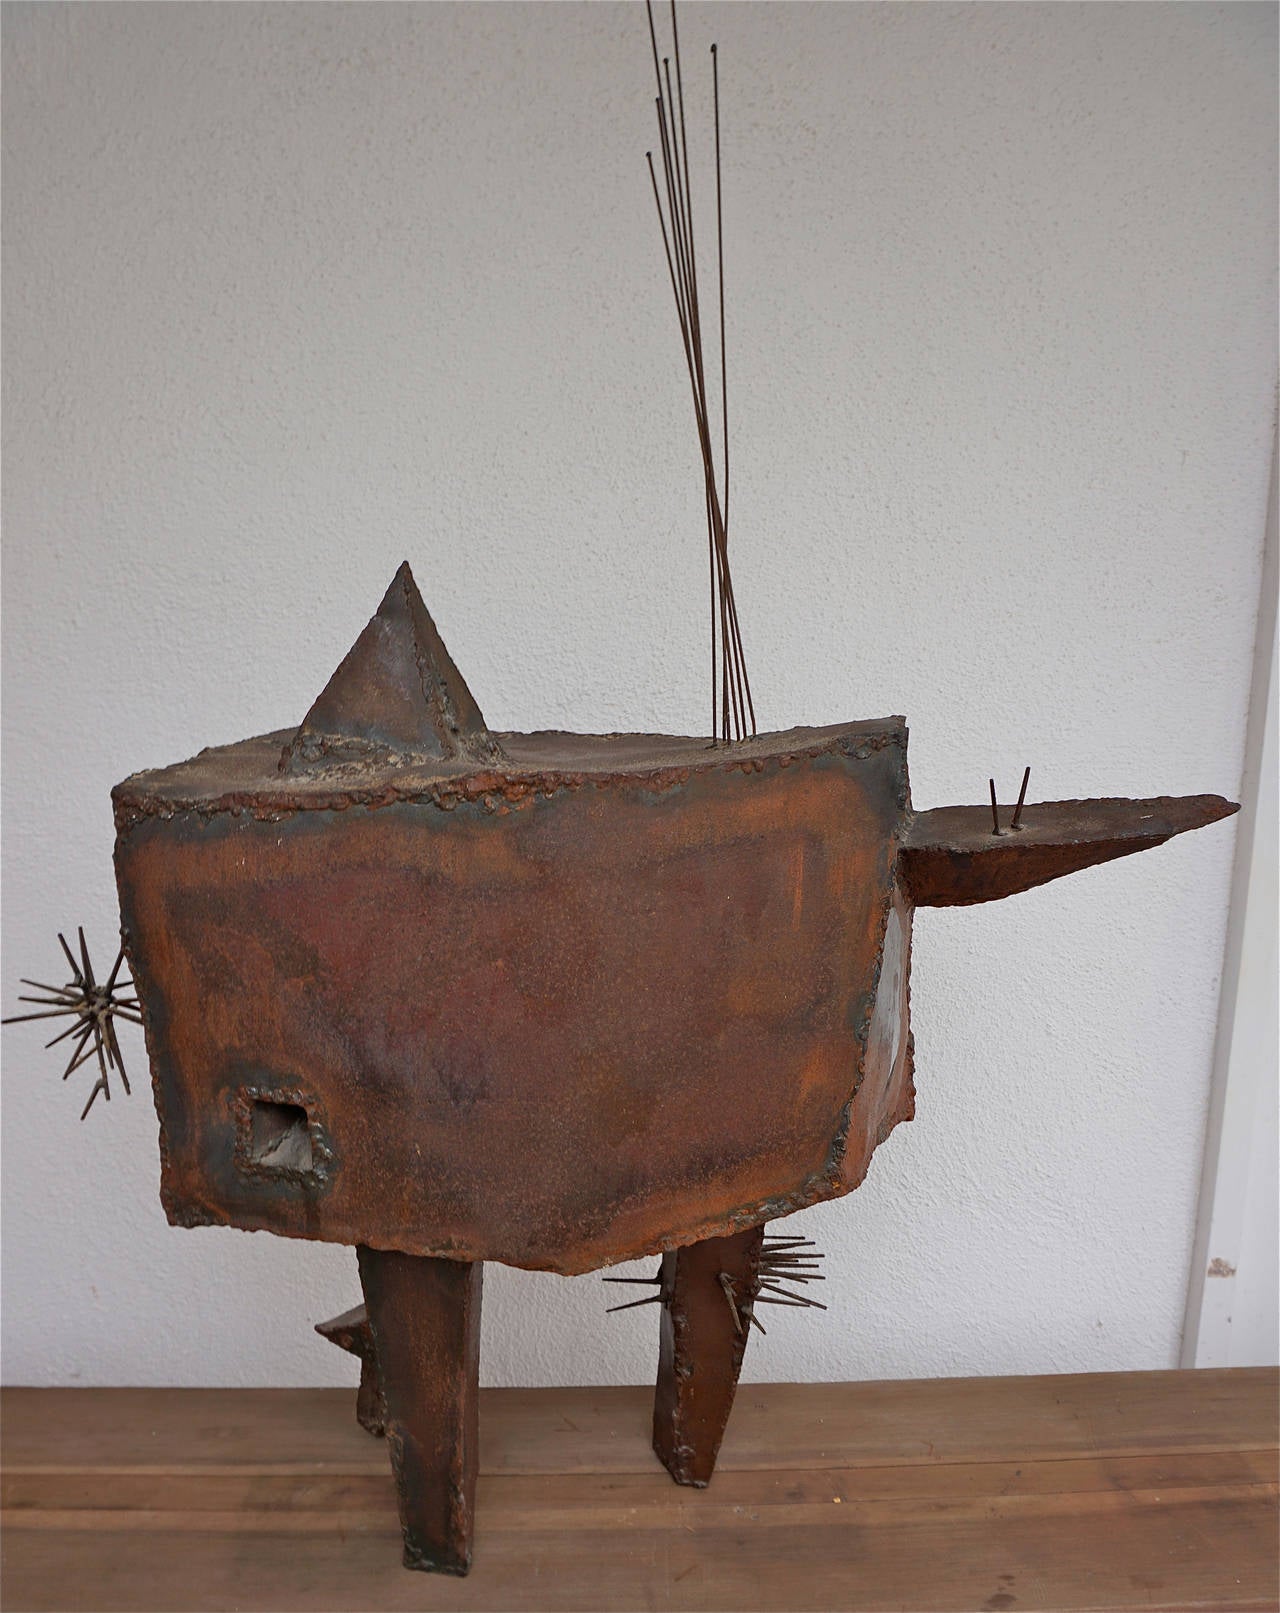 Welded, oxidized steel transformed into a very unusual sculpture.
Unsigned.